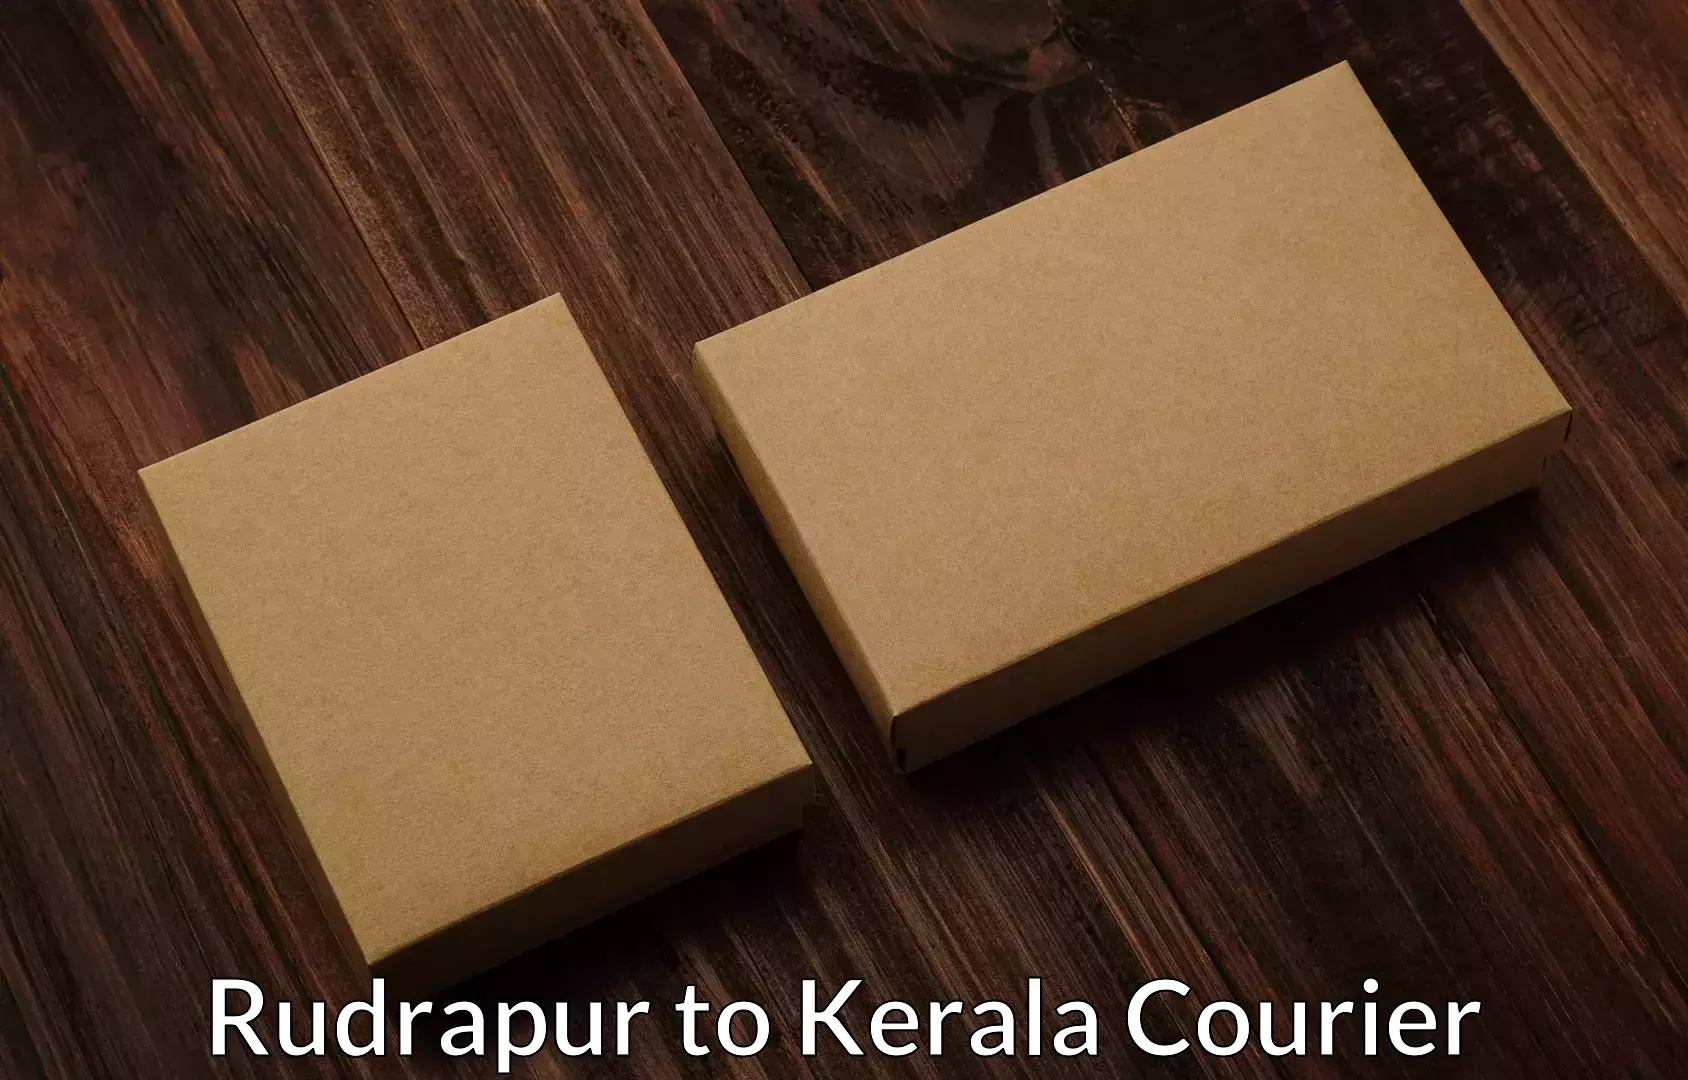 Furniture delivery service Rudrapur to Ernakulam